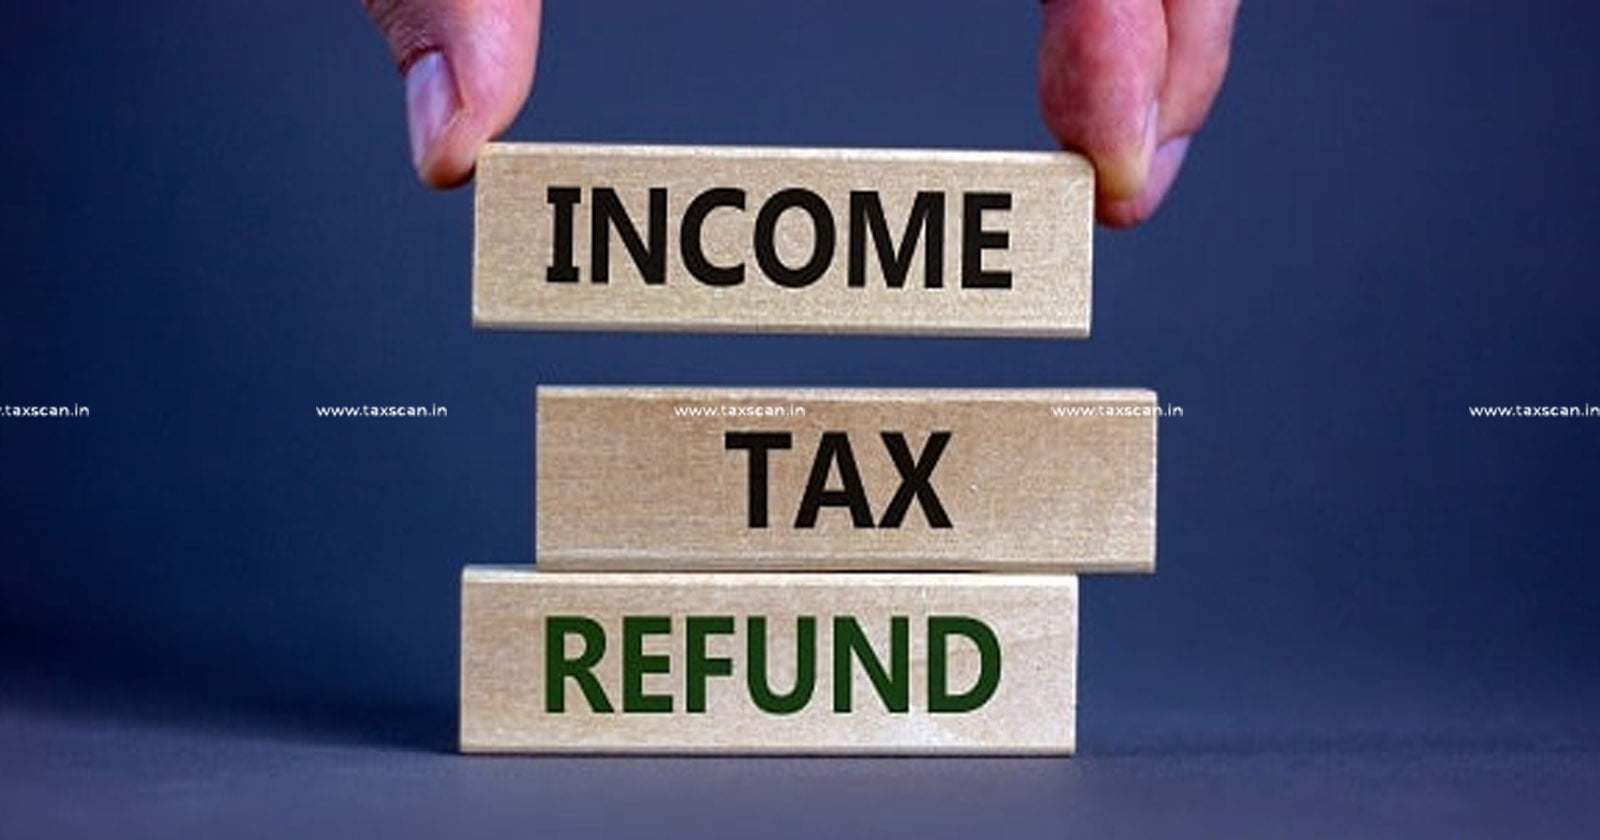 Mere 43 Days Delay - Claim Income Tax Refund - Bombay High Court -Income Tax Refund - taxscan